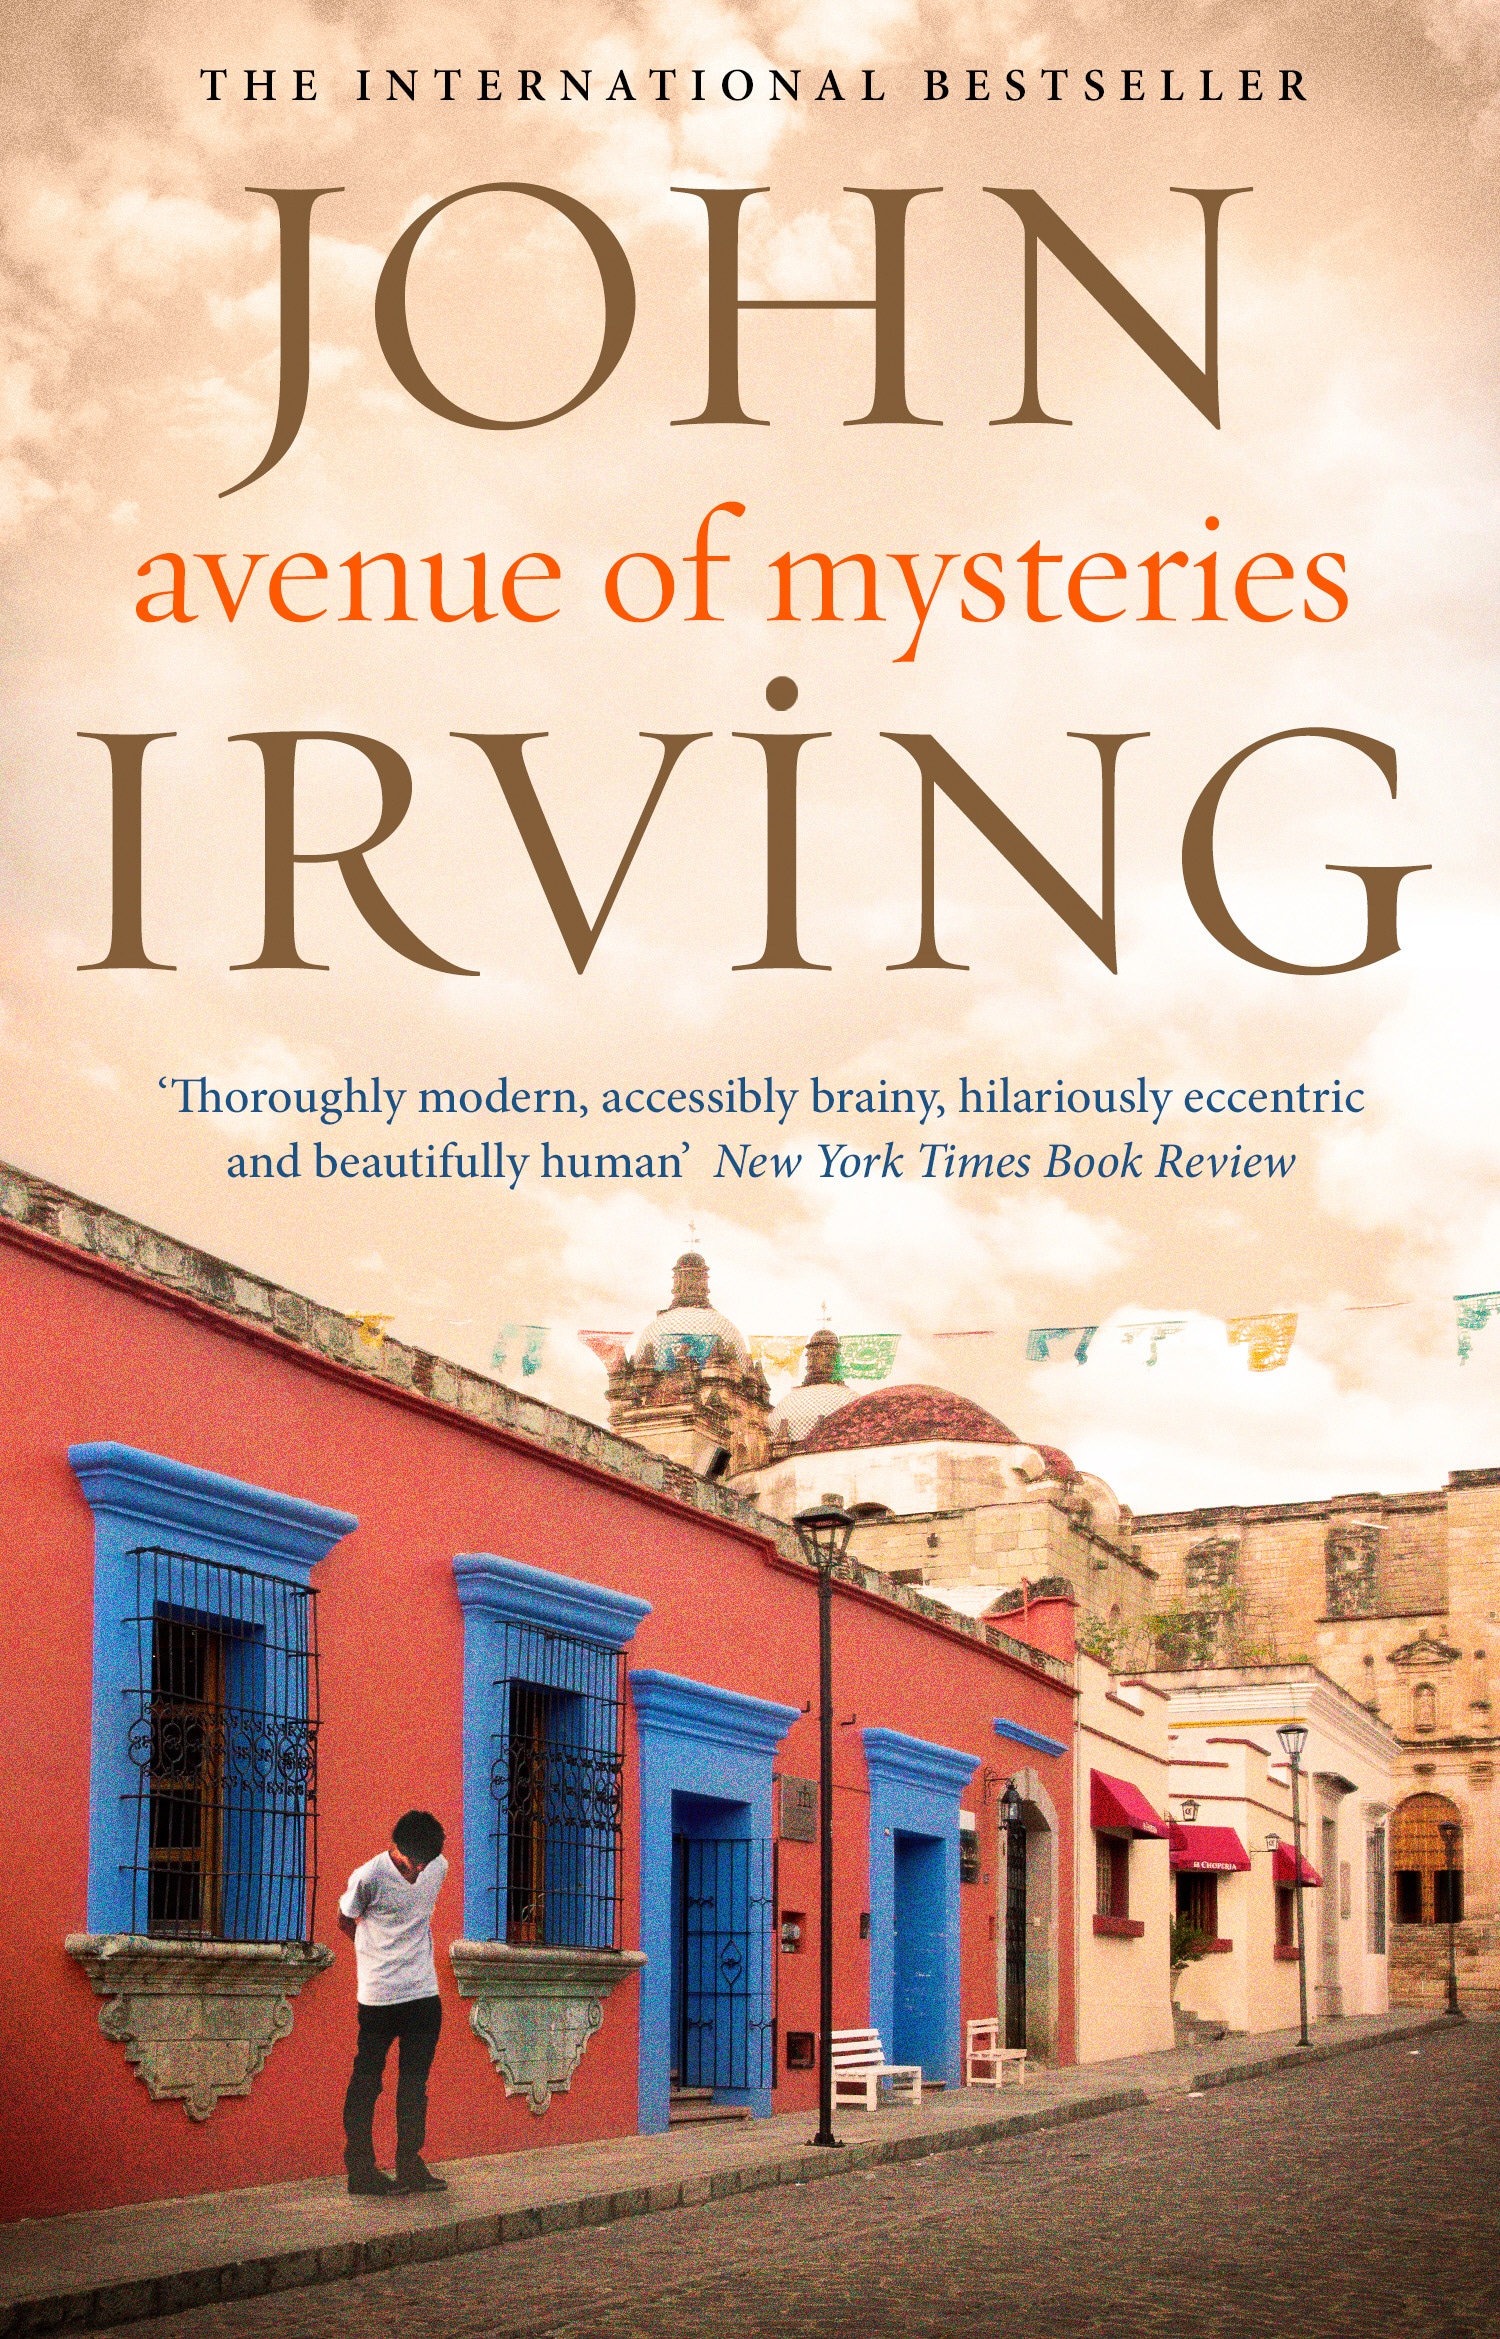 Book “Avenue of Mysteries” by John Irving — March 9, 2017